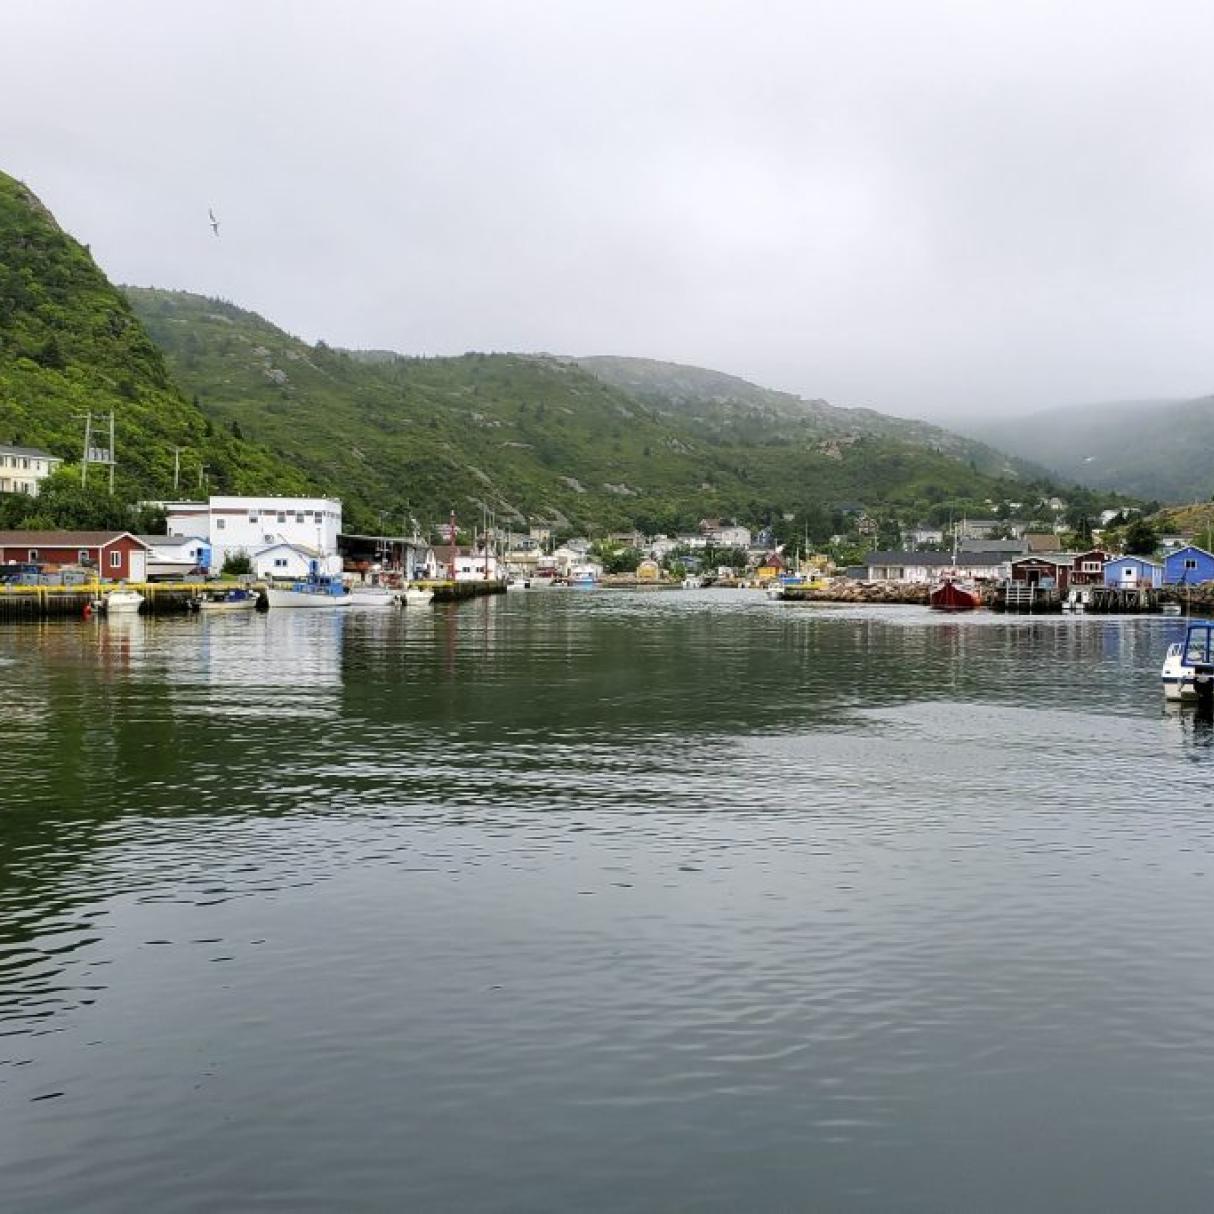 Petty Harbour in Newfoundland